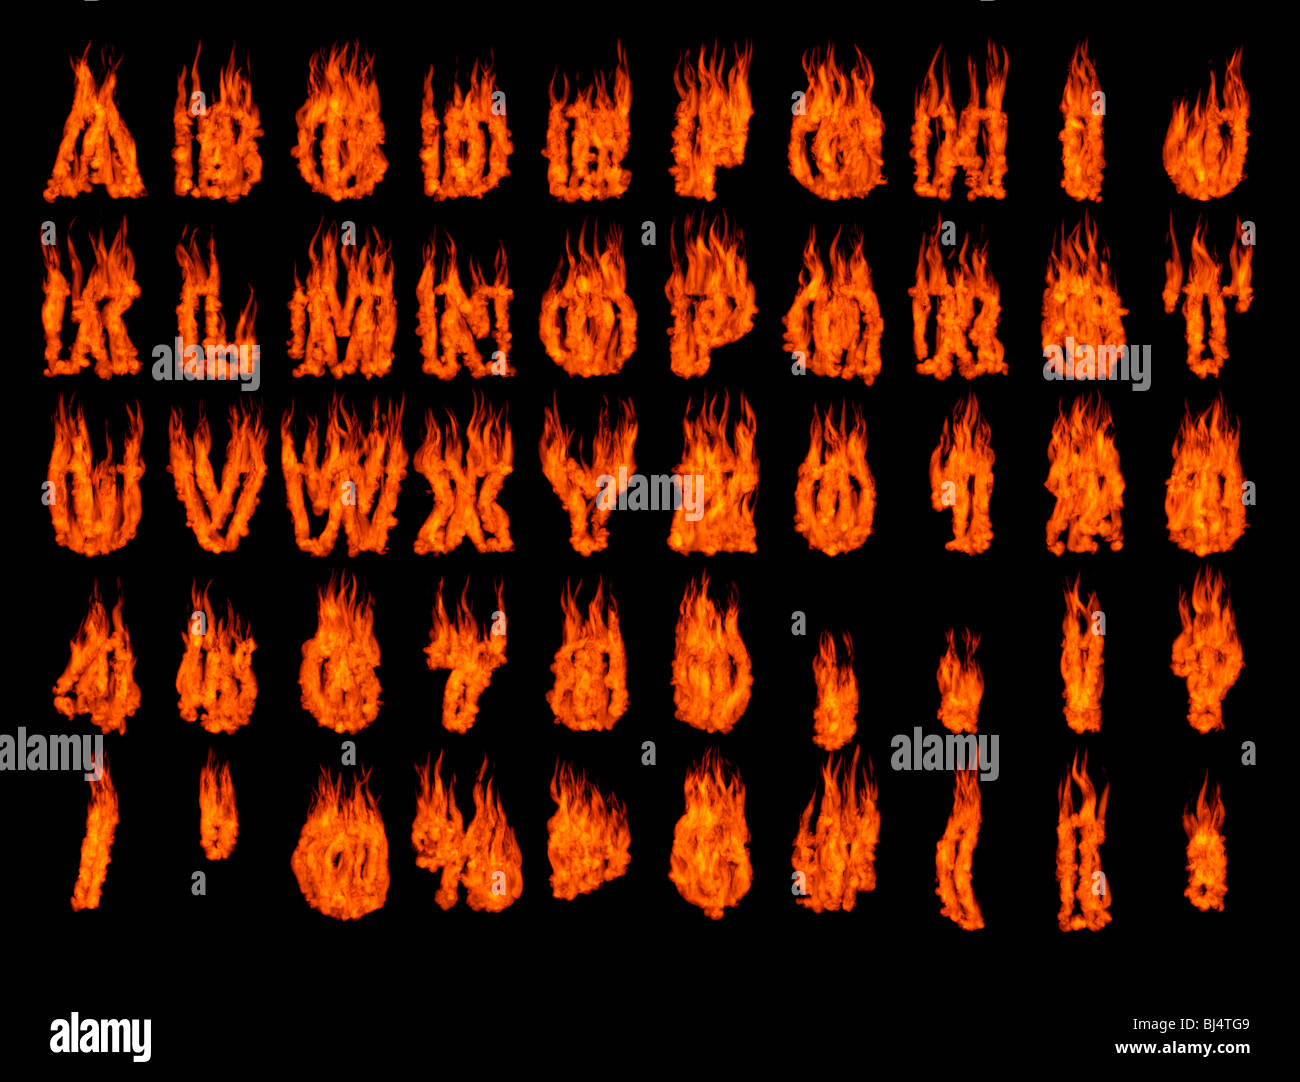 Burning alphabet letters and numbers isolated silhouettes on black background. Rendered 3D illustration Stock Photo